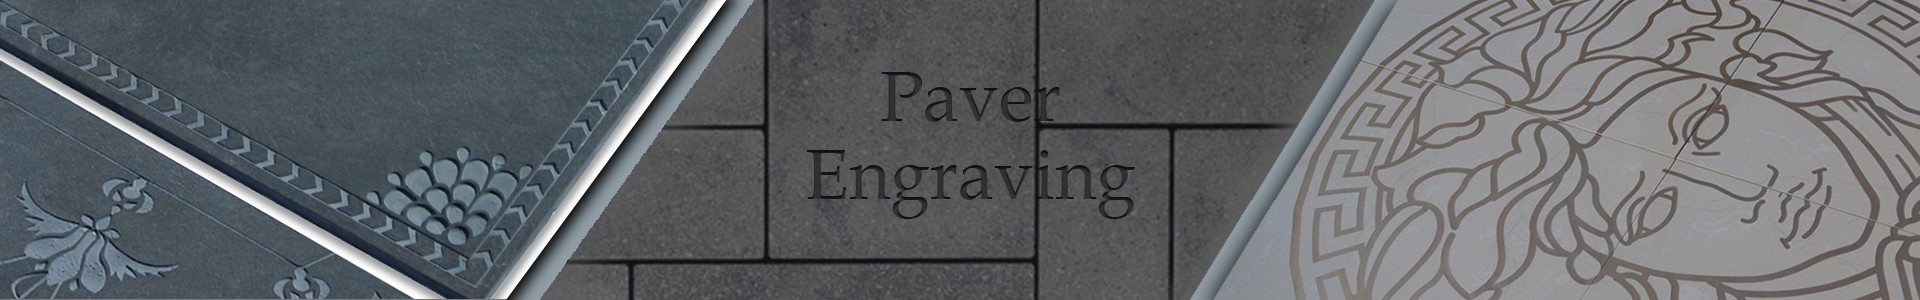 paver_banner-1.png